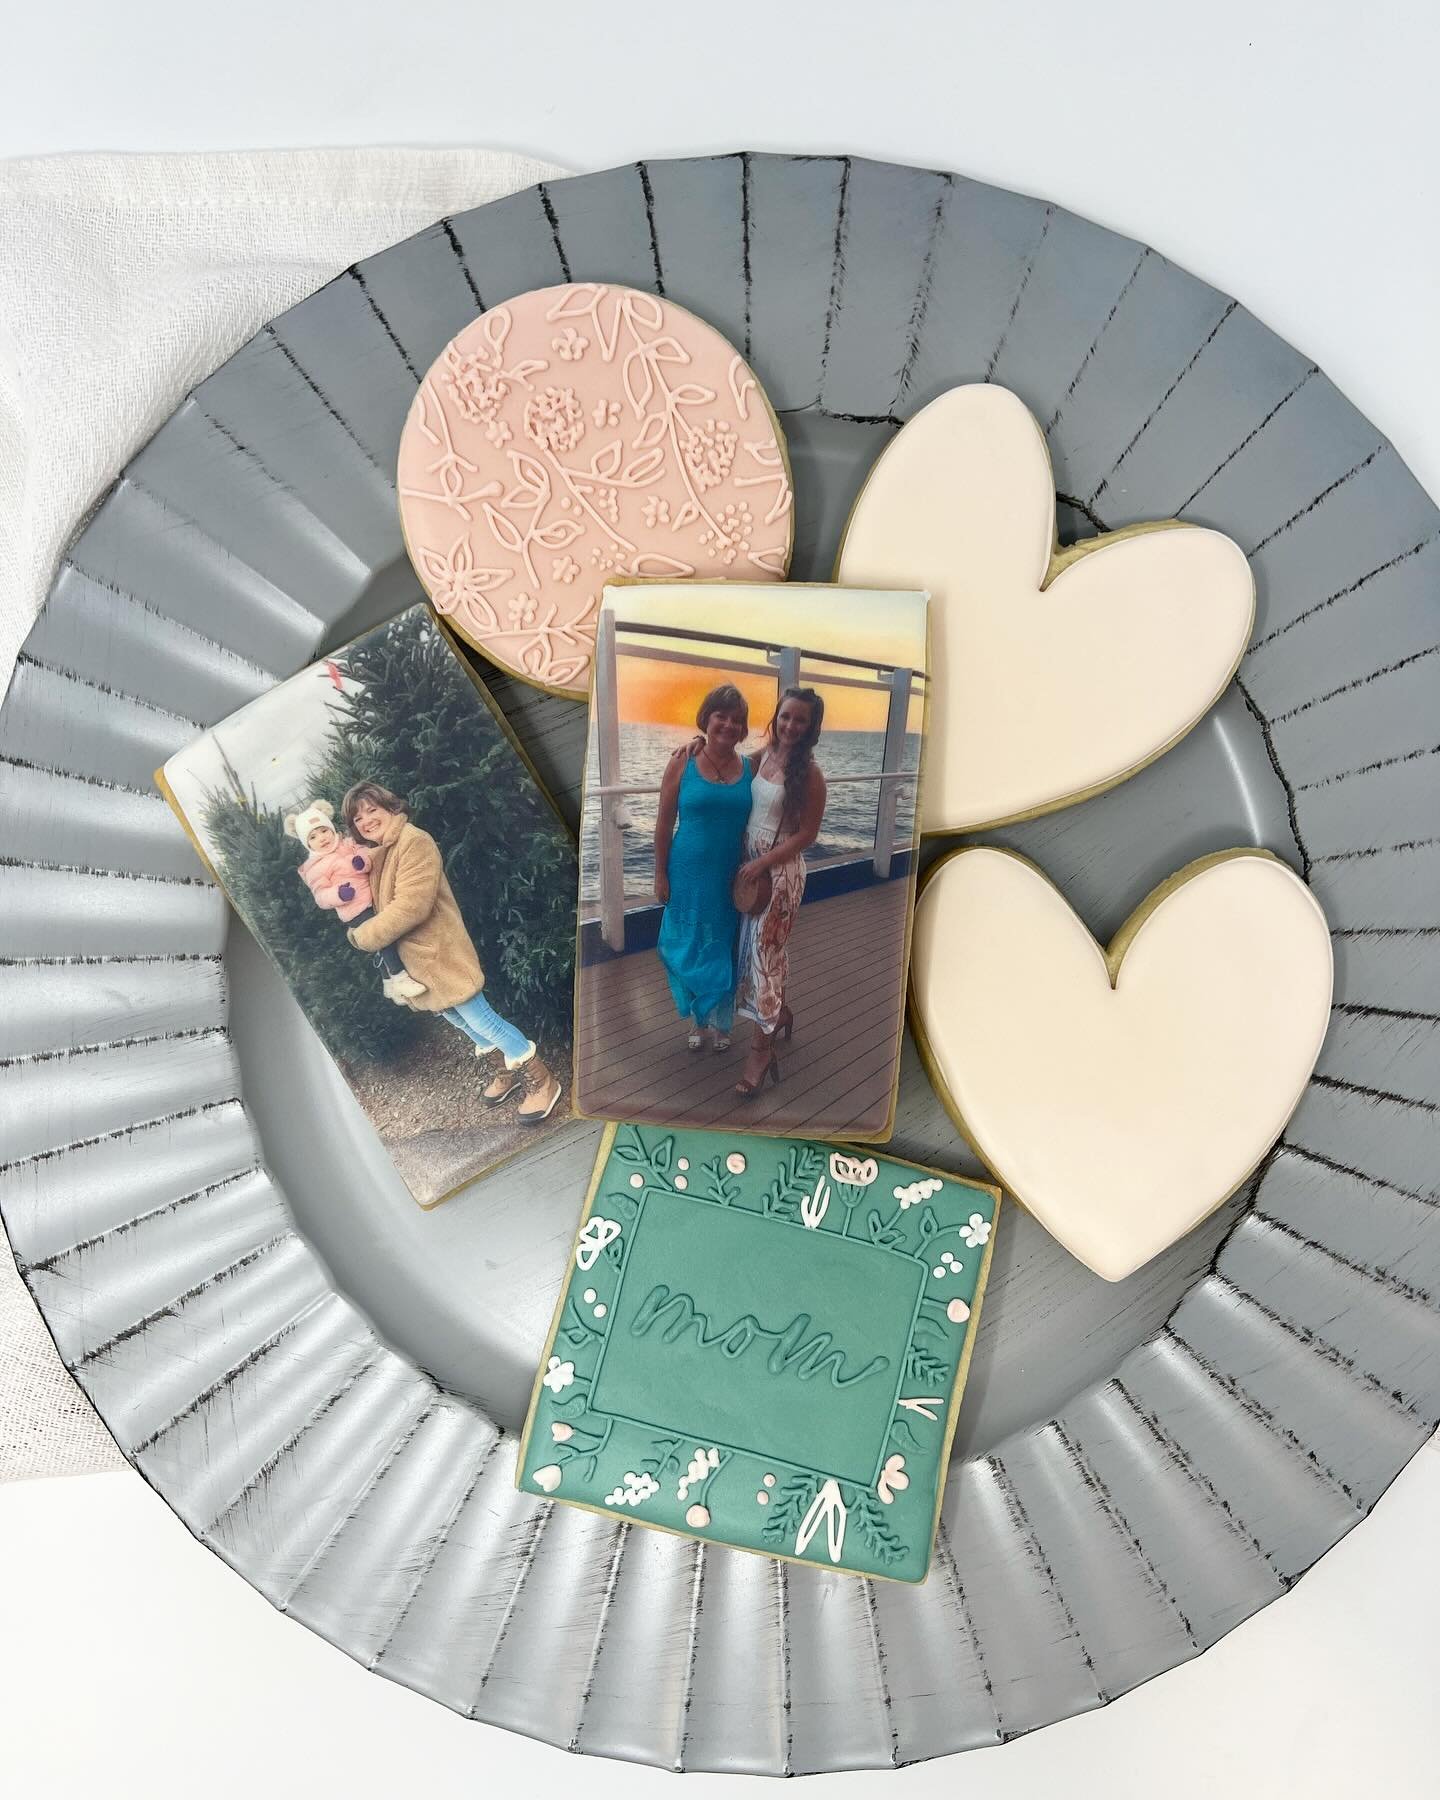 Give mom a thoughtful and delicious gift this Mother's Day! Add 2 photos to this beautiful cookie set for the easiest gift! We also have our dessert boxes with a variety of our sweet treats to test taste with mom or keep for yourself! 

#buffalo #buf